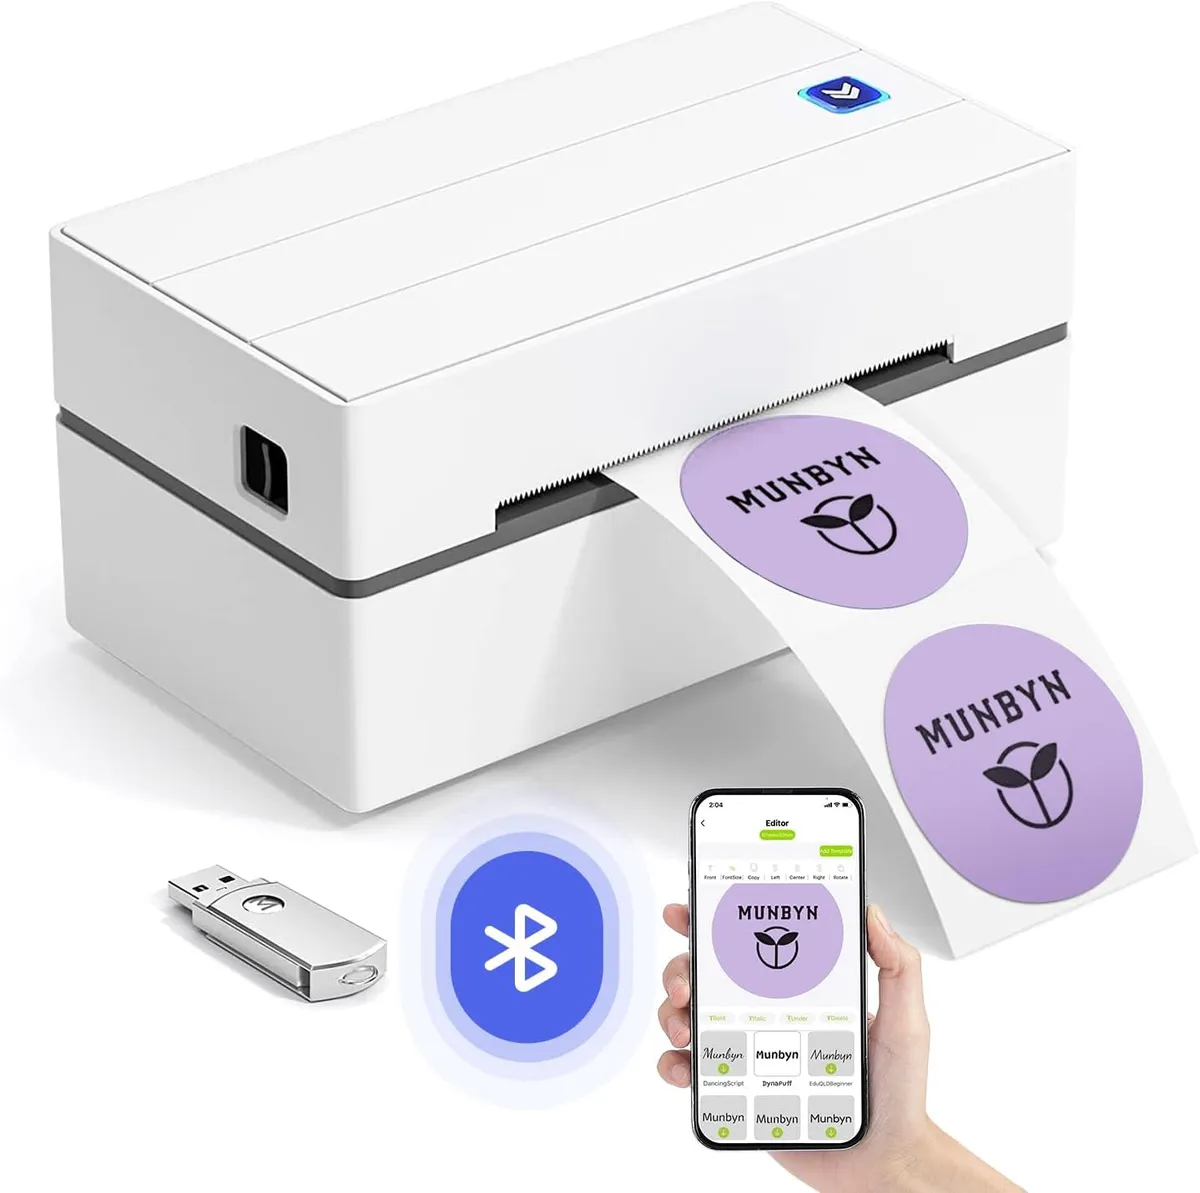 6 Best Printer for Stickers 2023